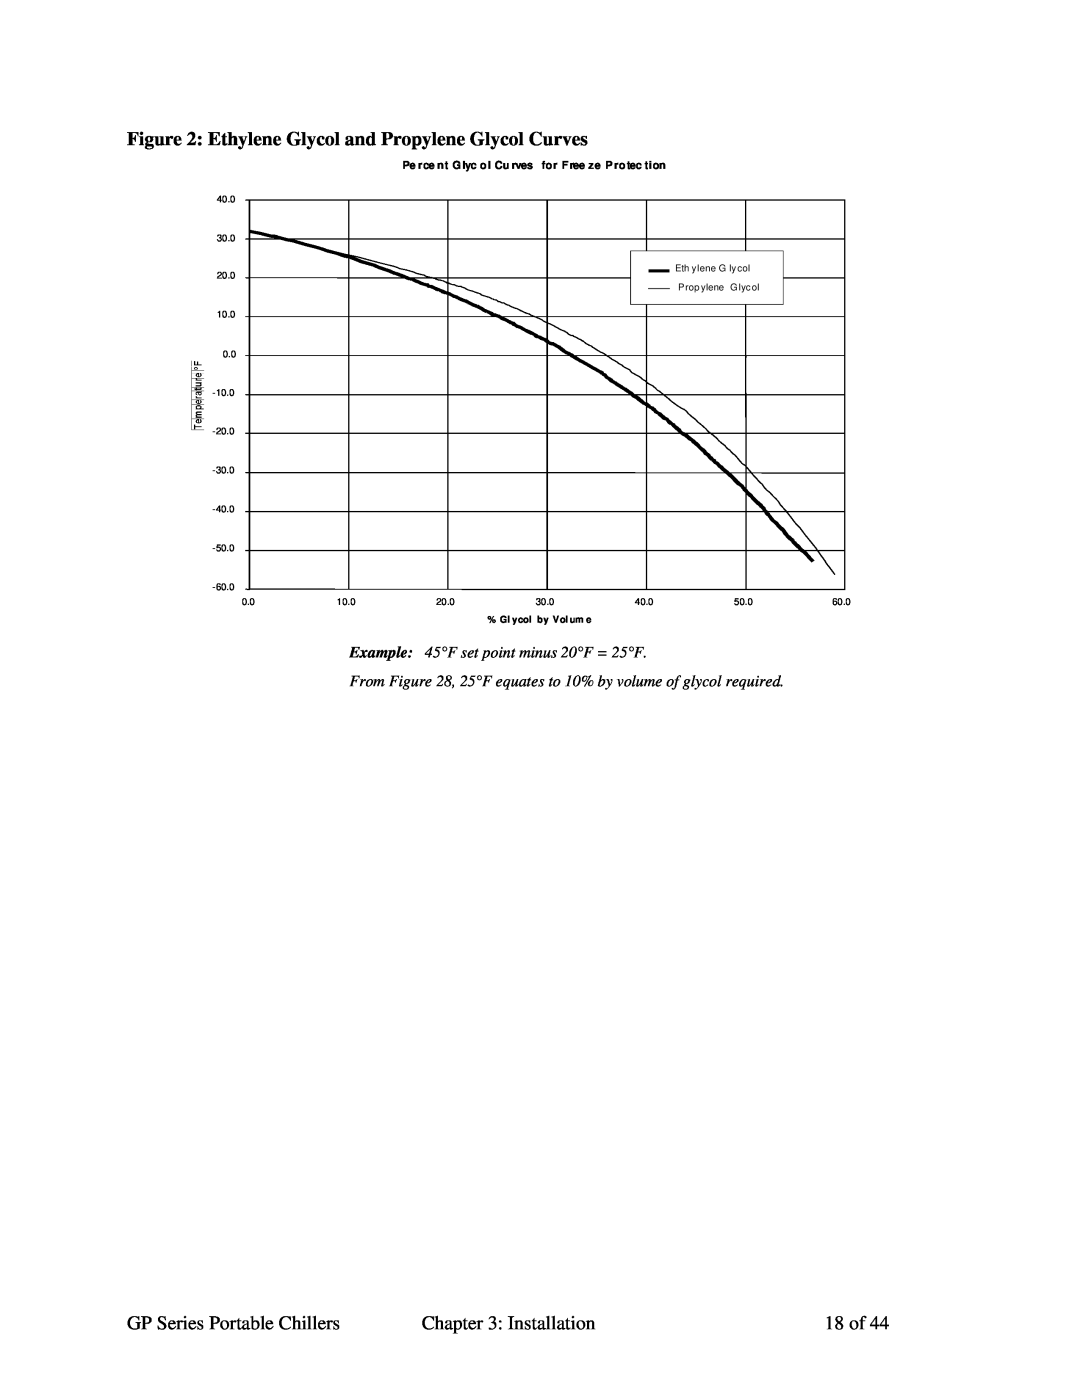 Sterling GP Series Ethylene Glycol and Propylene Glycol Curves, Example 45F set point minus 20F = 25F, Gl ycol by Vol um e 